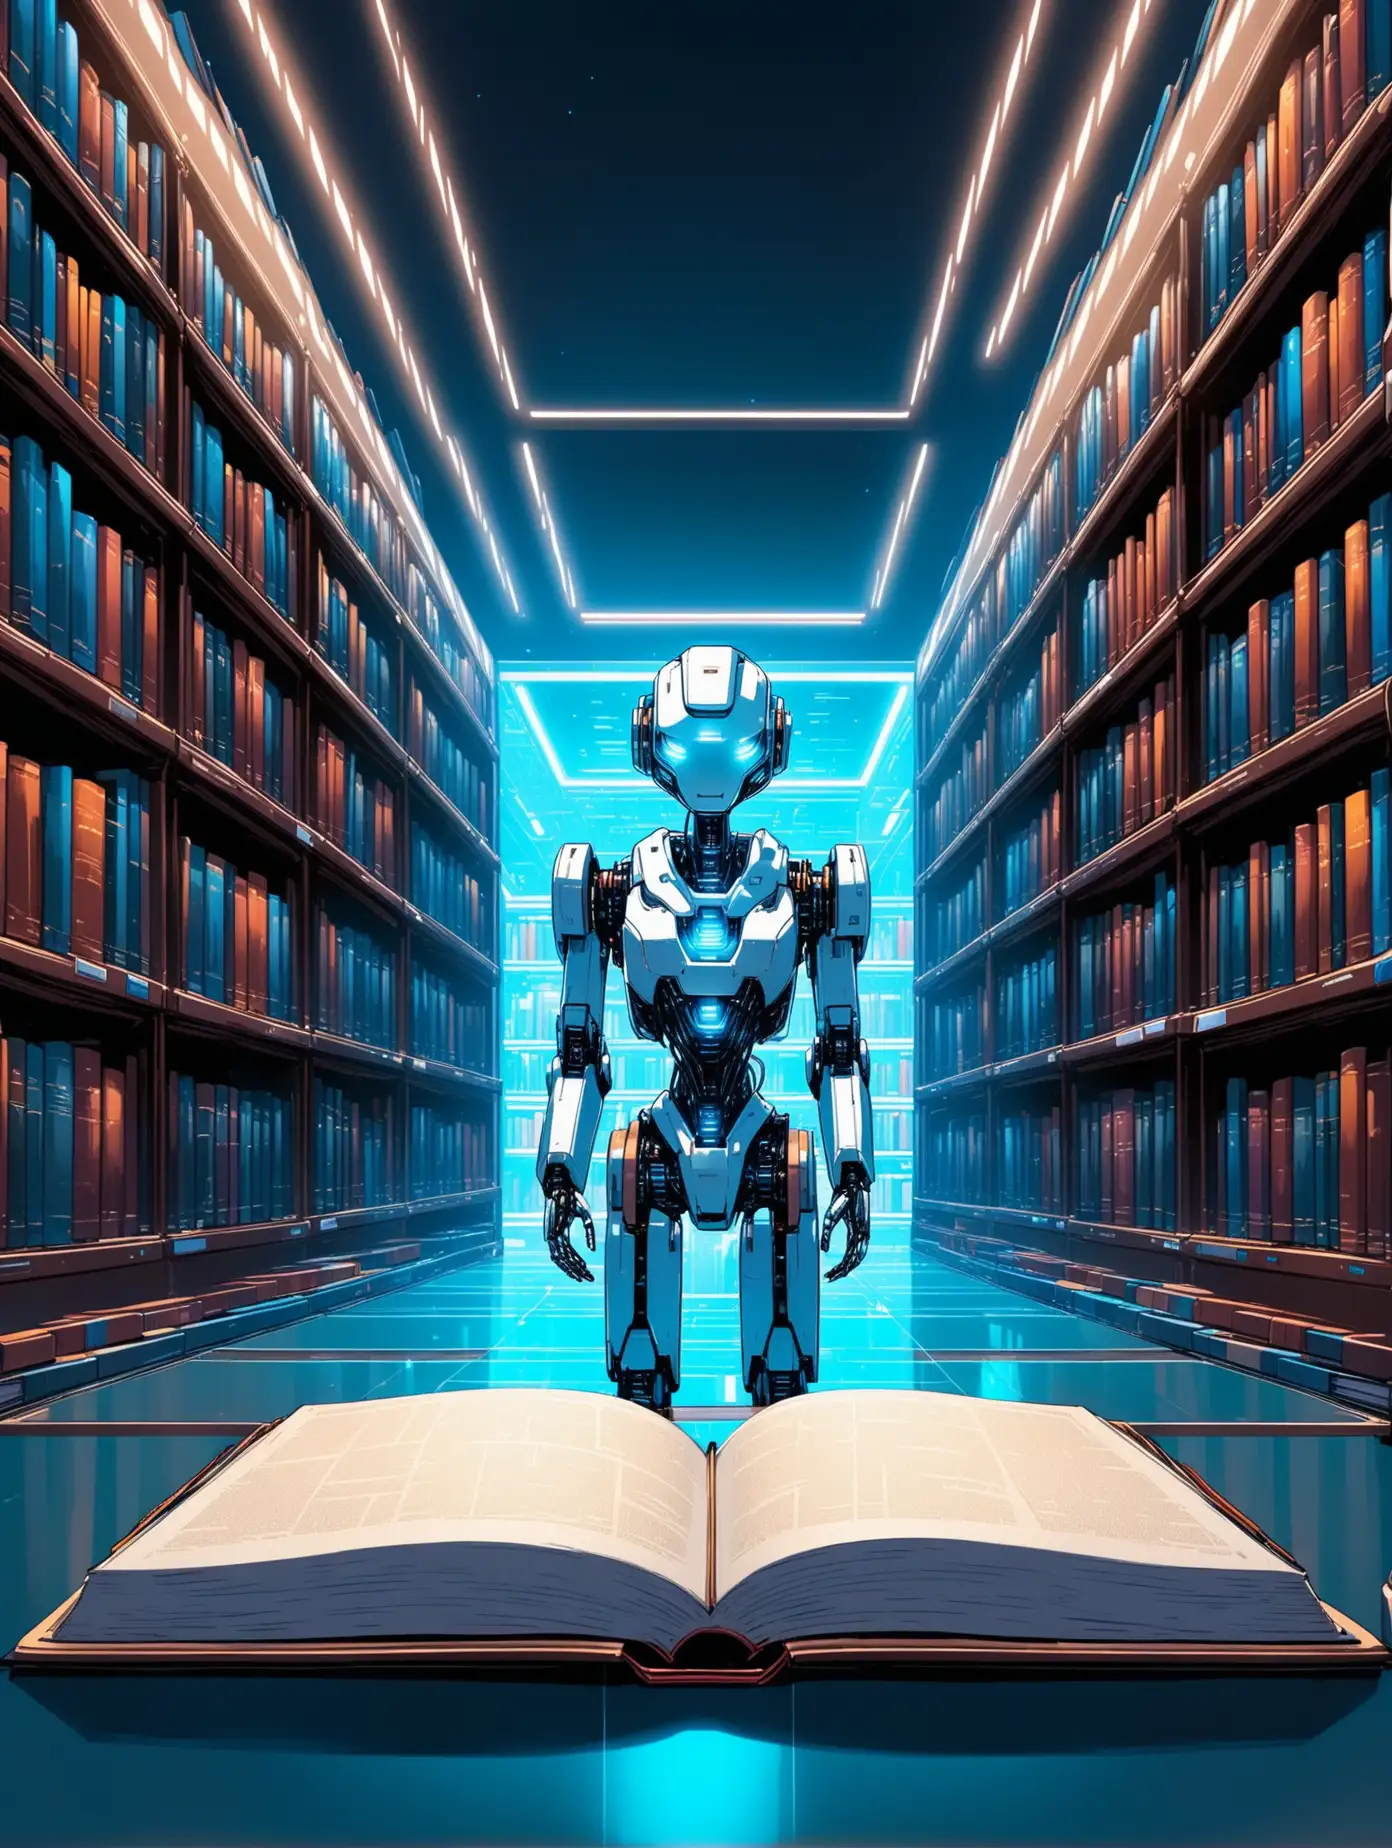 AI robot looking through books in alribrary 
The library has cool futuristic, high tech aesthetic, and blue LED lights
backround art